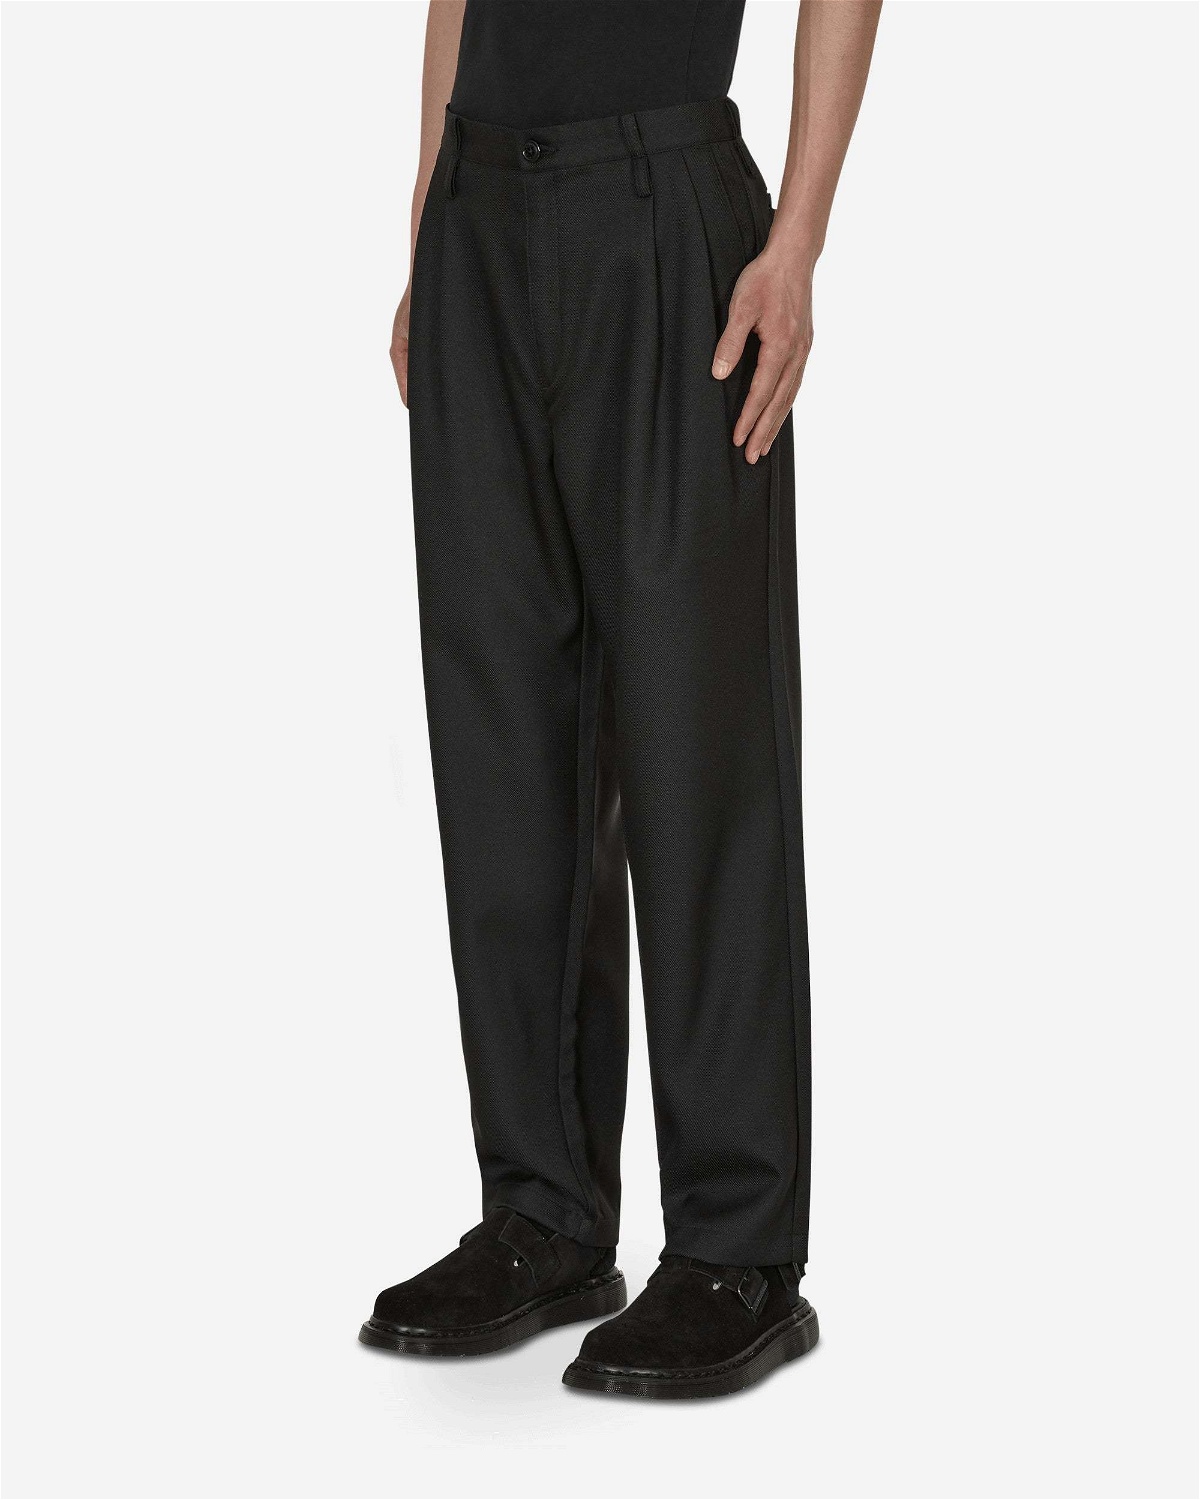 Tuck 01 Trousers